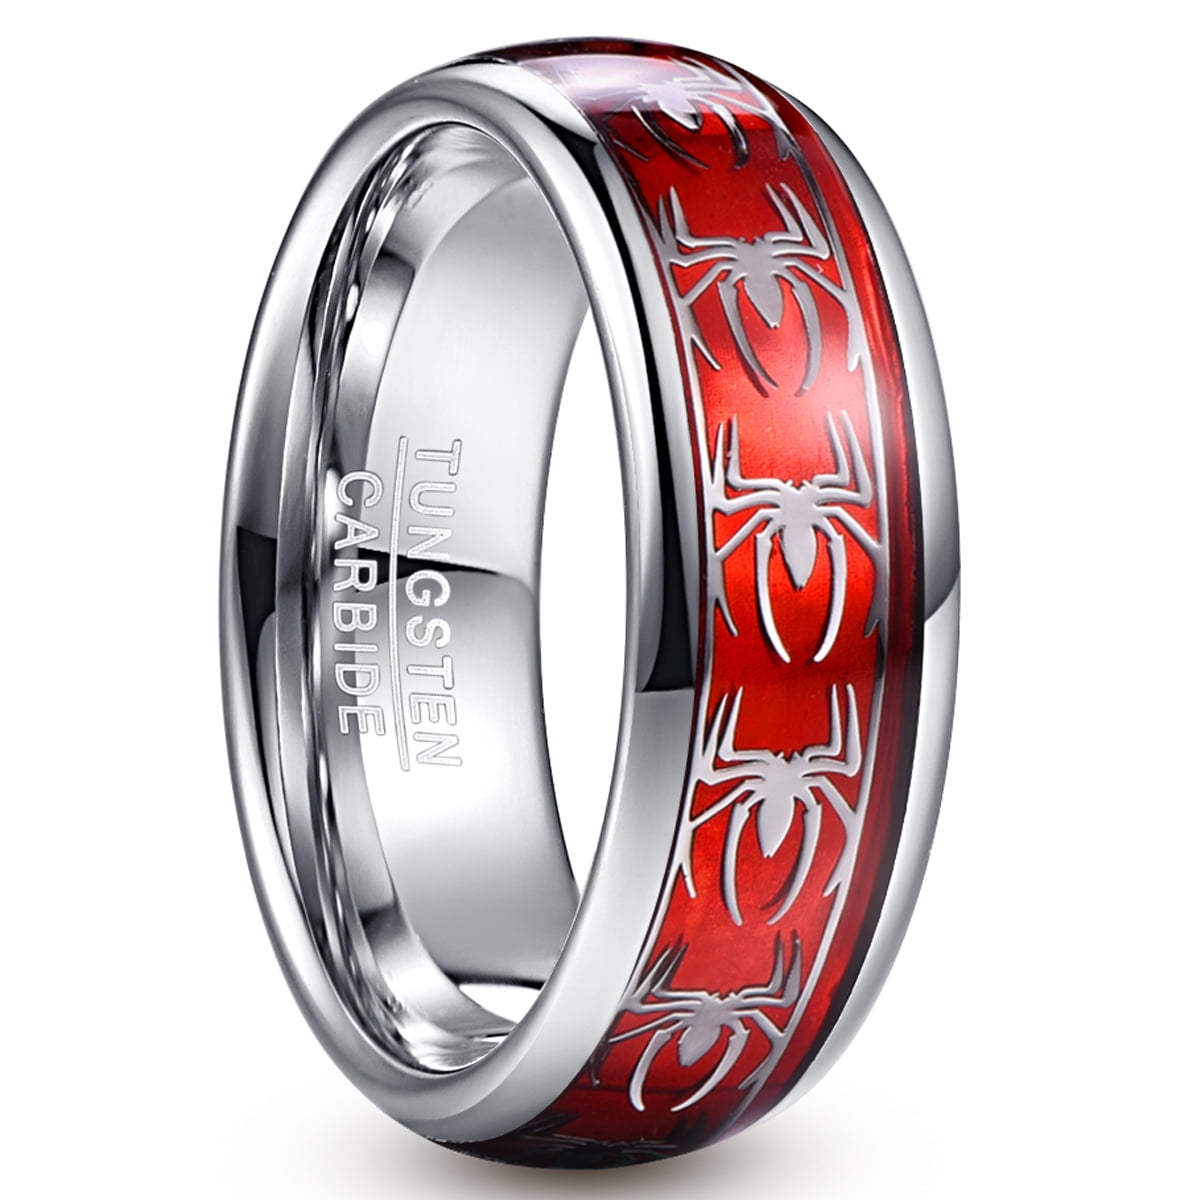 Men s 8mm Tungsten Carbide Ring with Spider Pattern Inlay Domed Edges Size 7 12 1bb9841e d6d8 4507 8683 c88c2e03448b.1d092146e4c5e834cacb04b63c23b51b